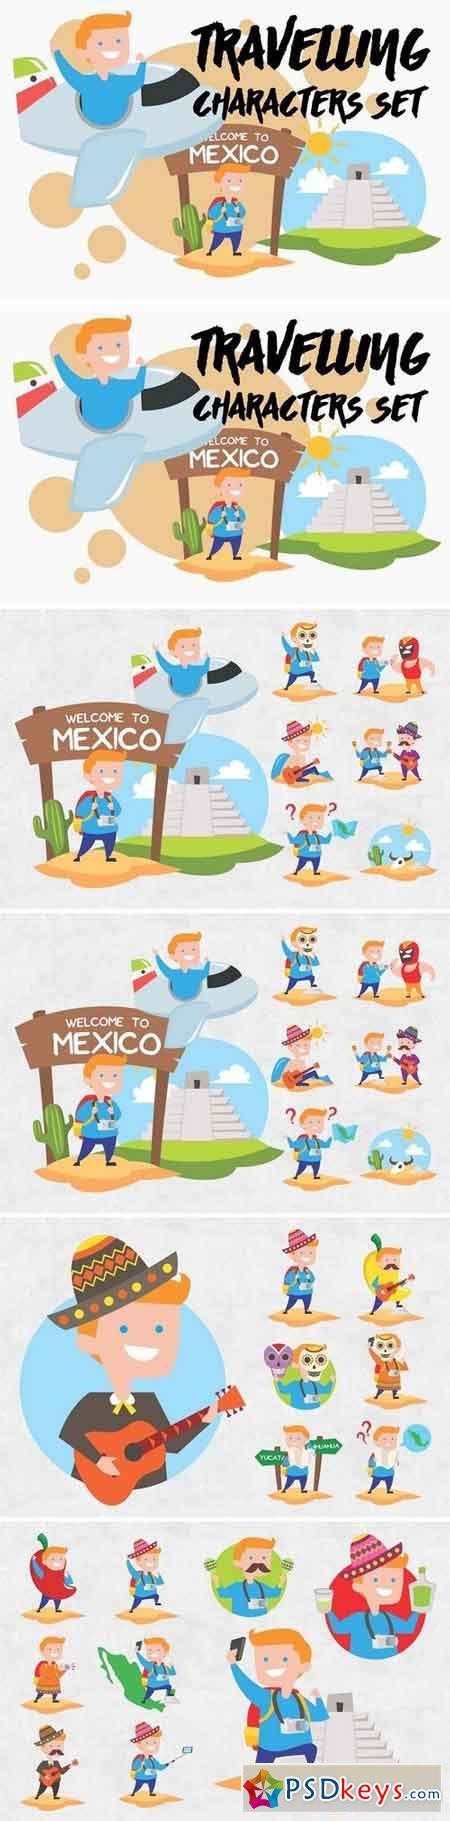 Travelling Characters Set - Mexico 1570229